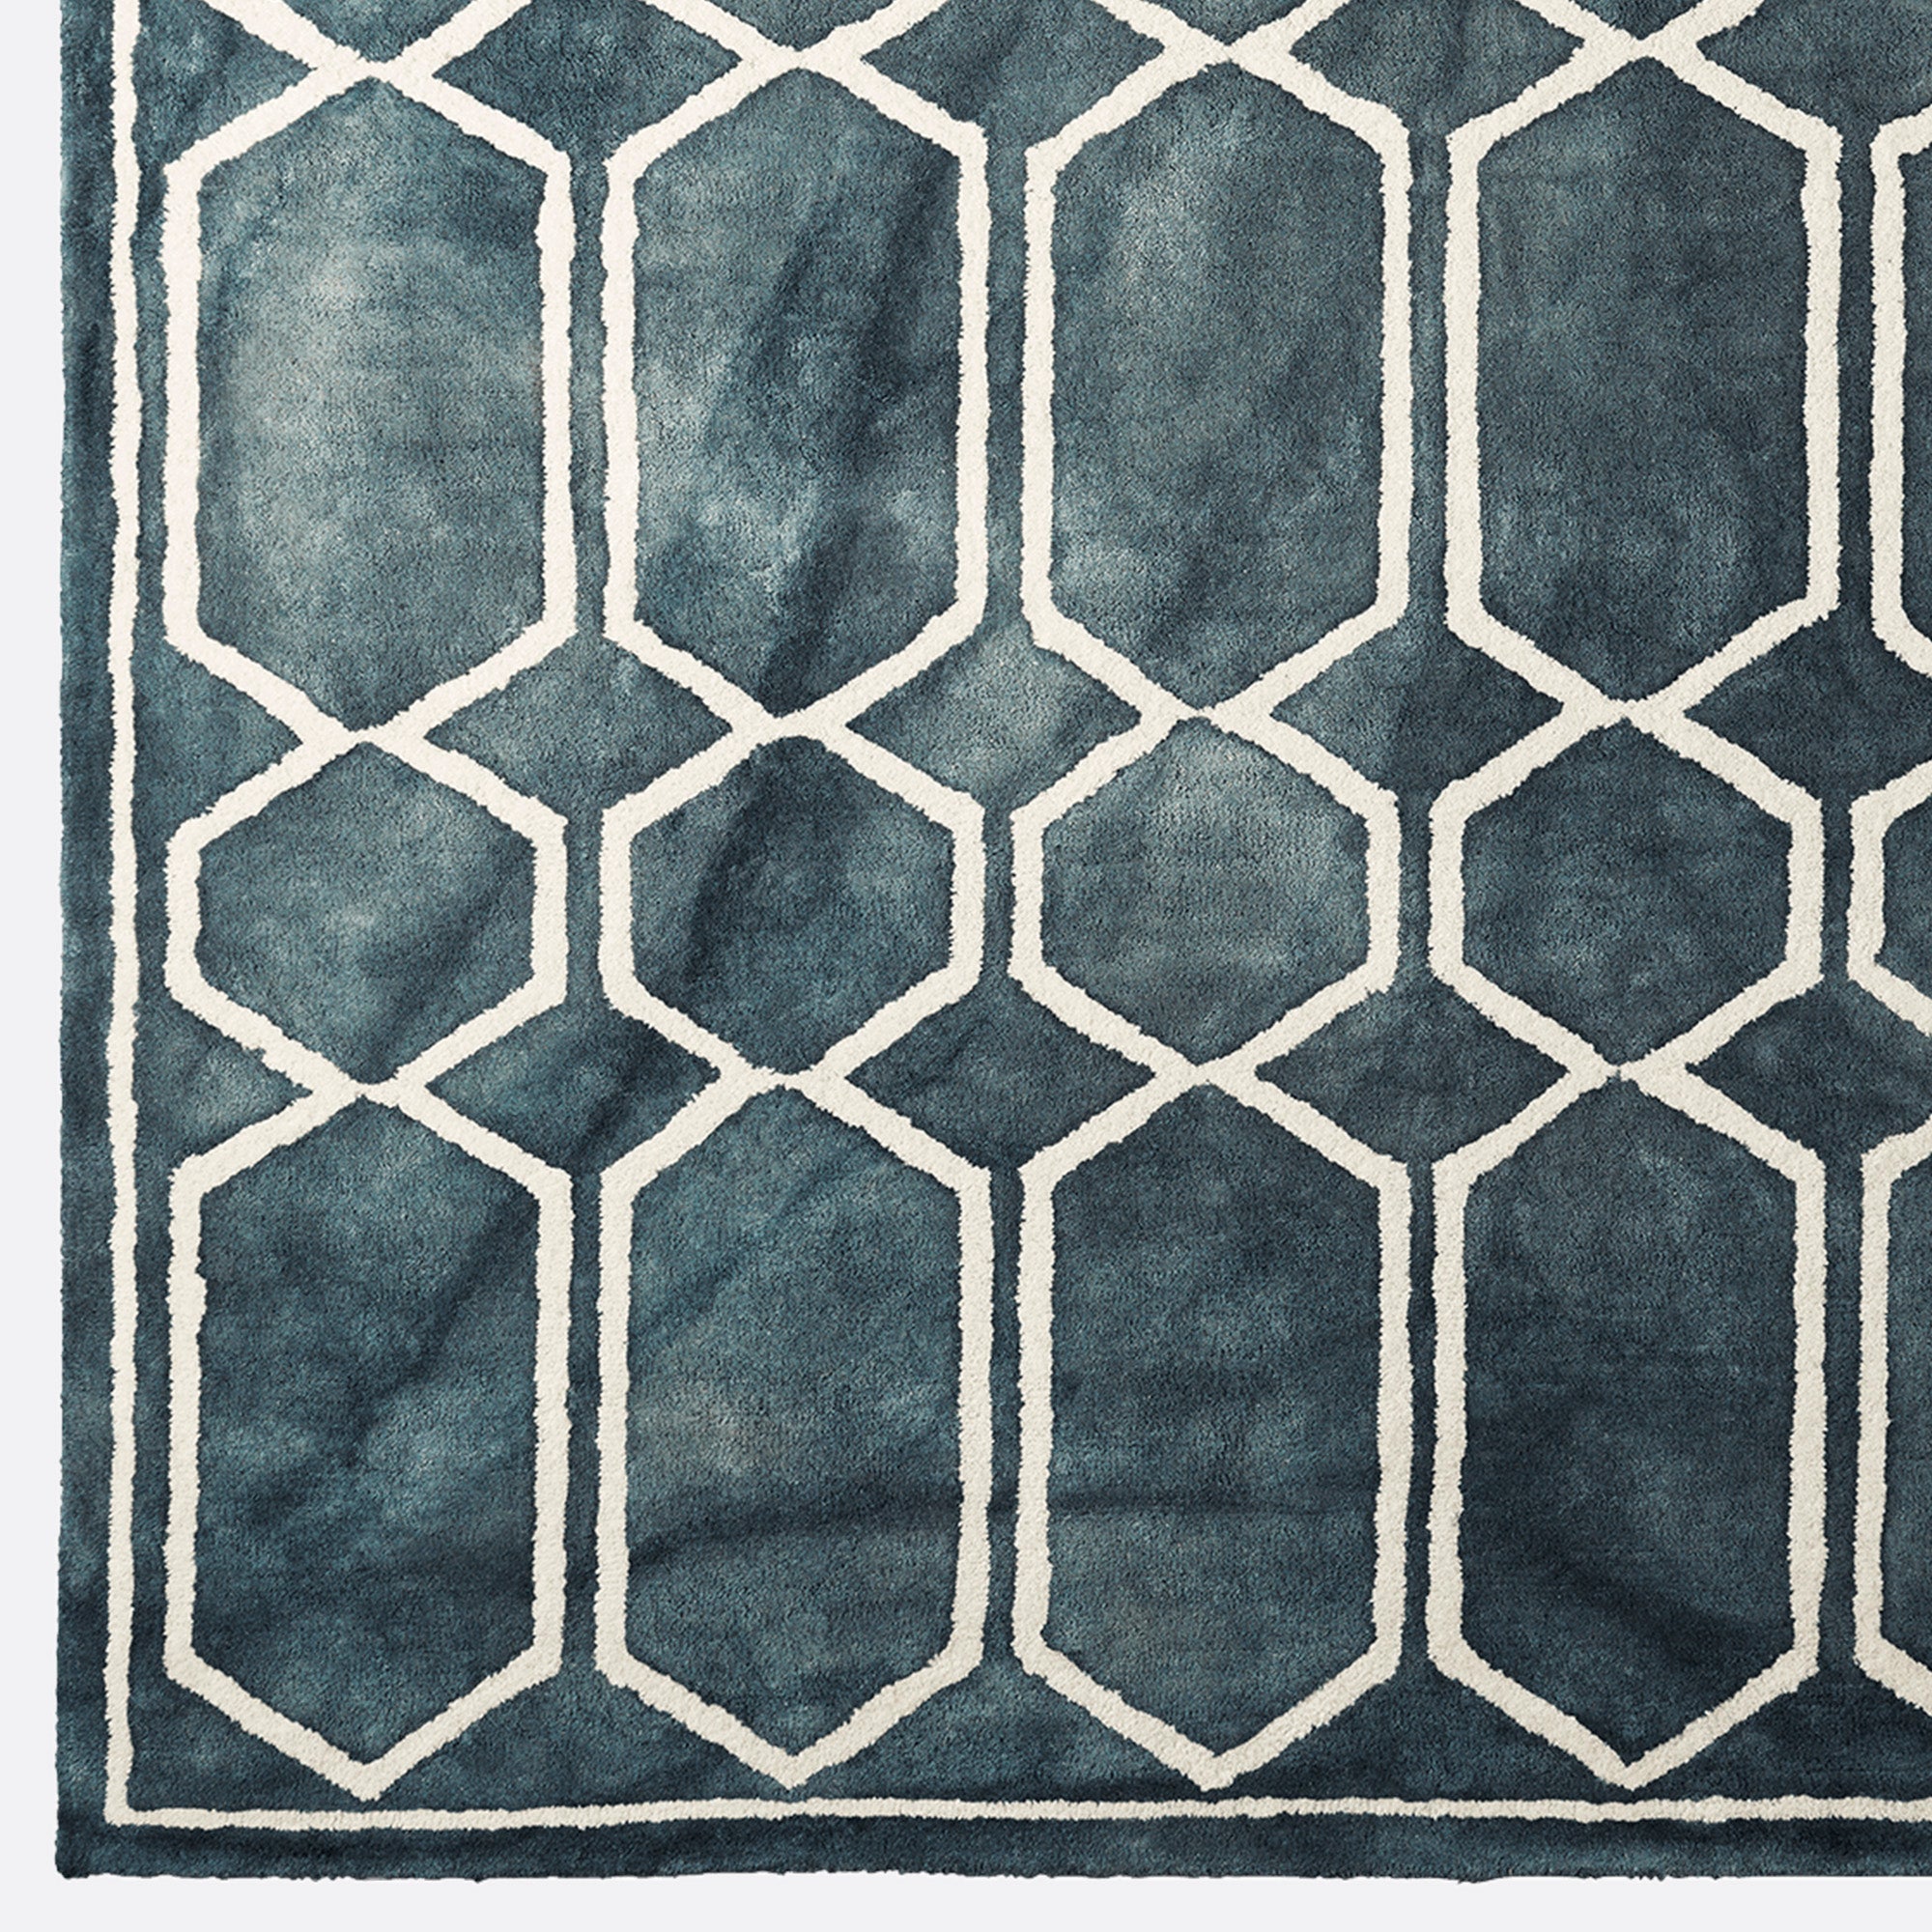 Tie Dye Graphite Ink Rug - THAT COOL LIVING